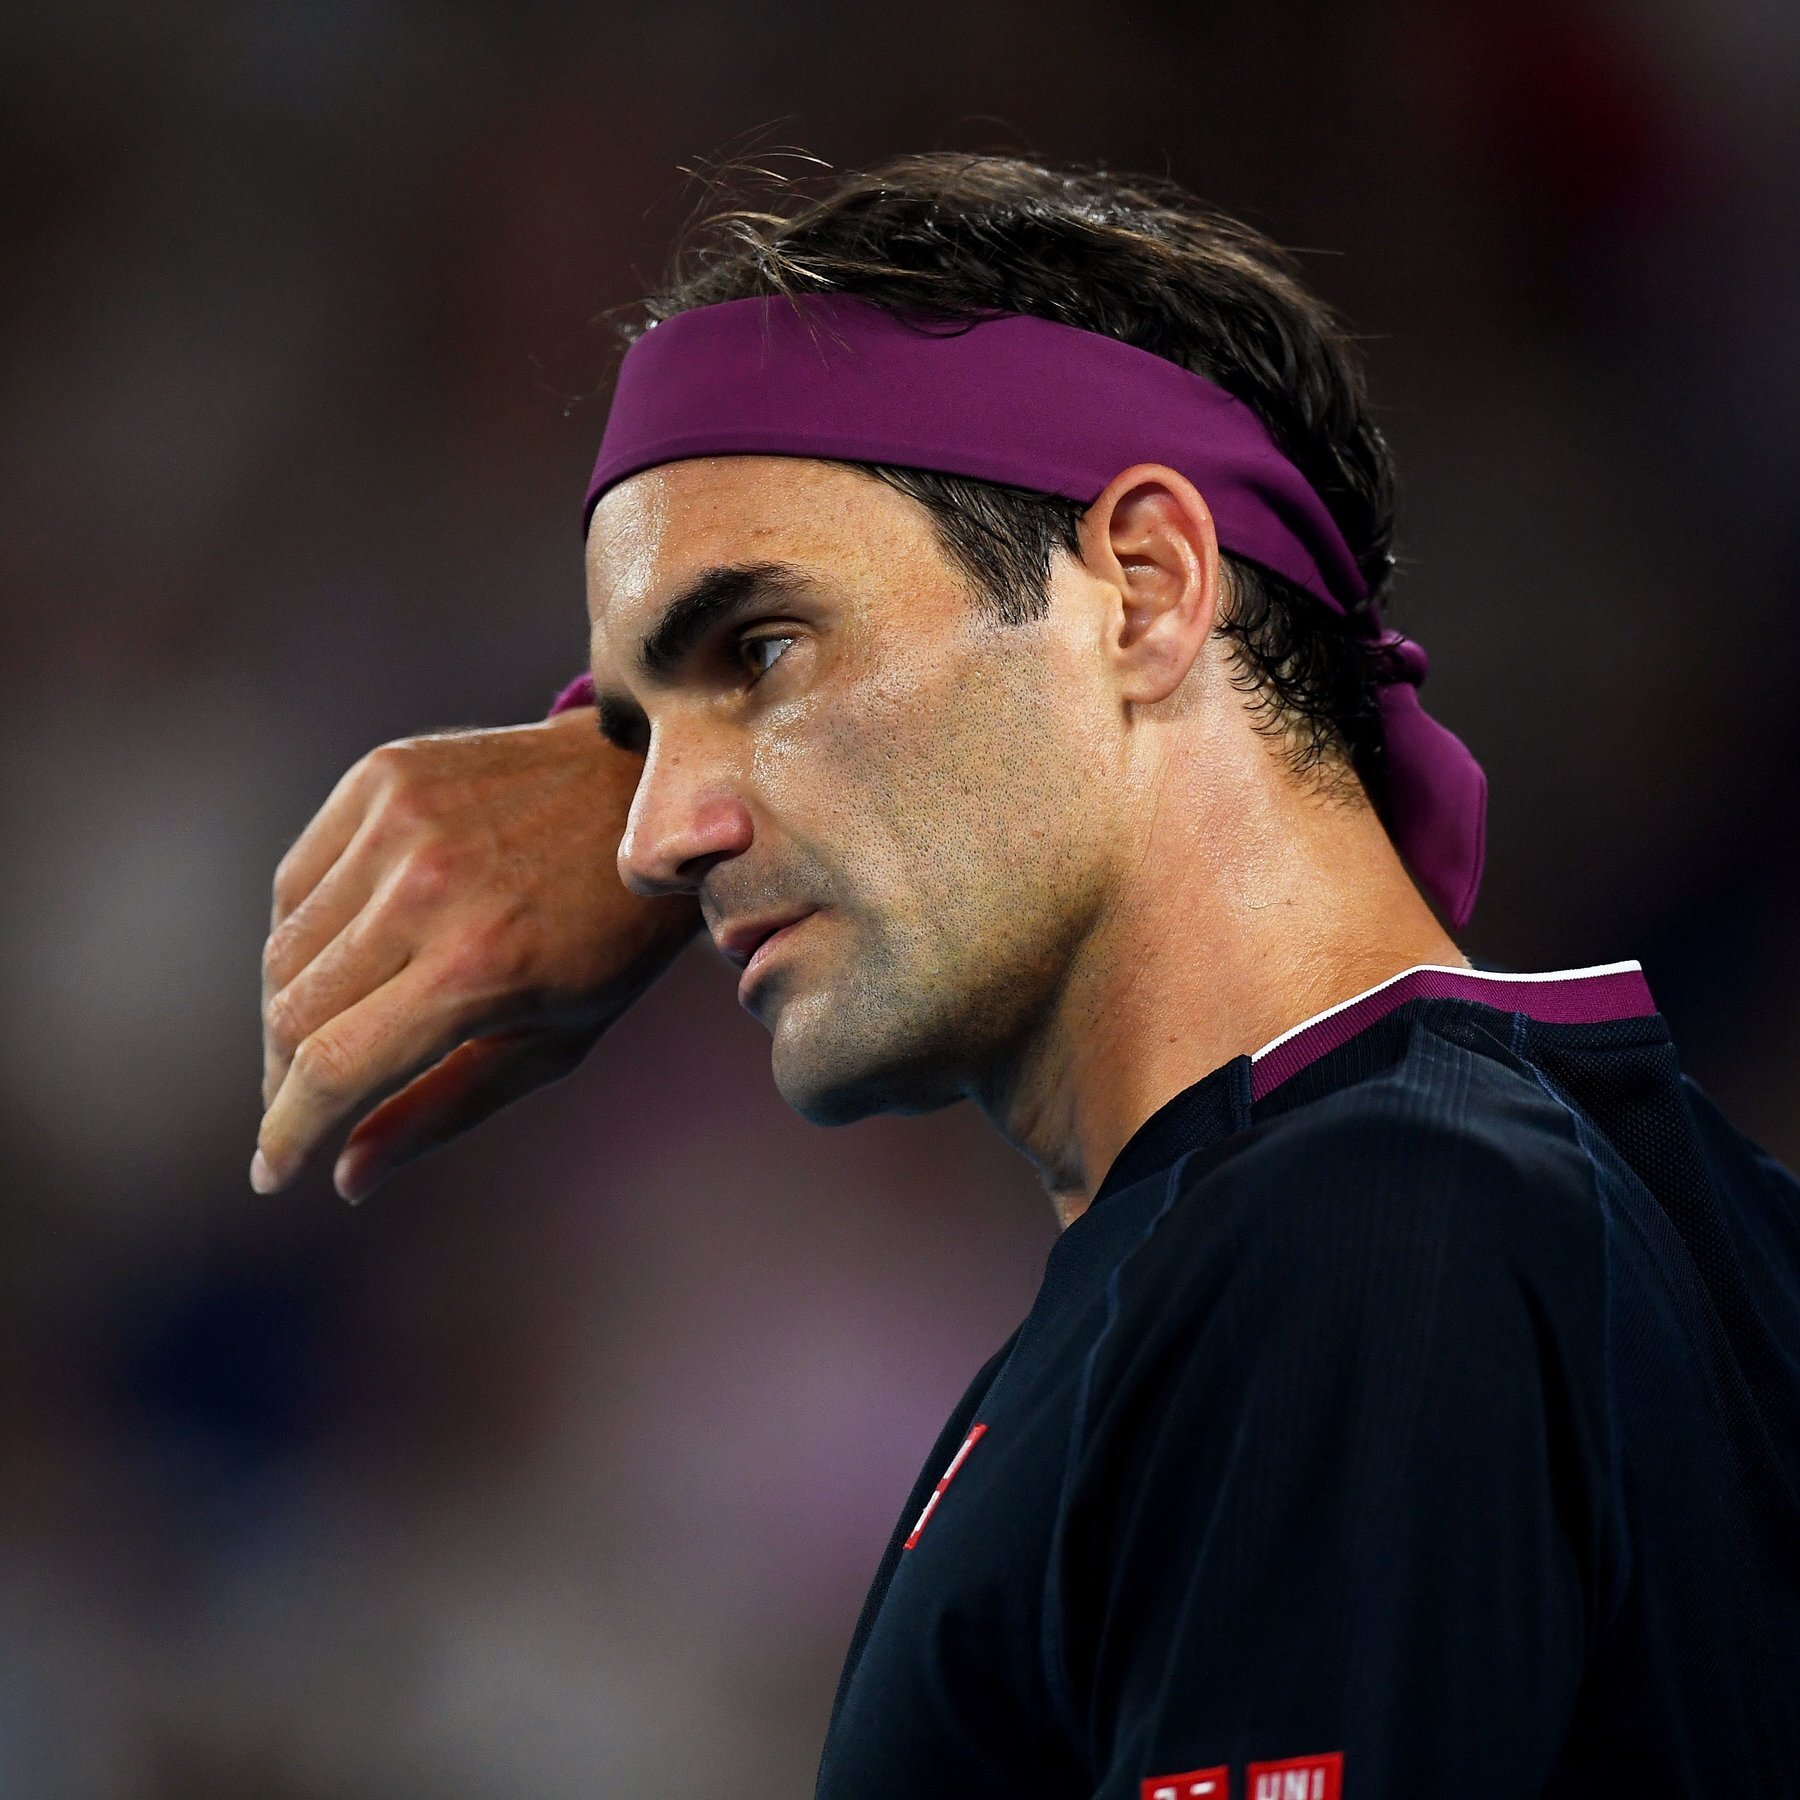 Calm under pressure - Federer seems to be in a world of his own during matches